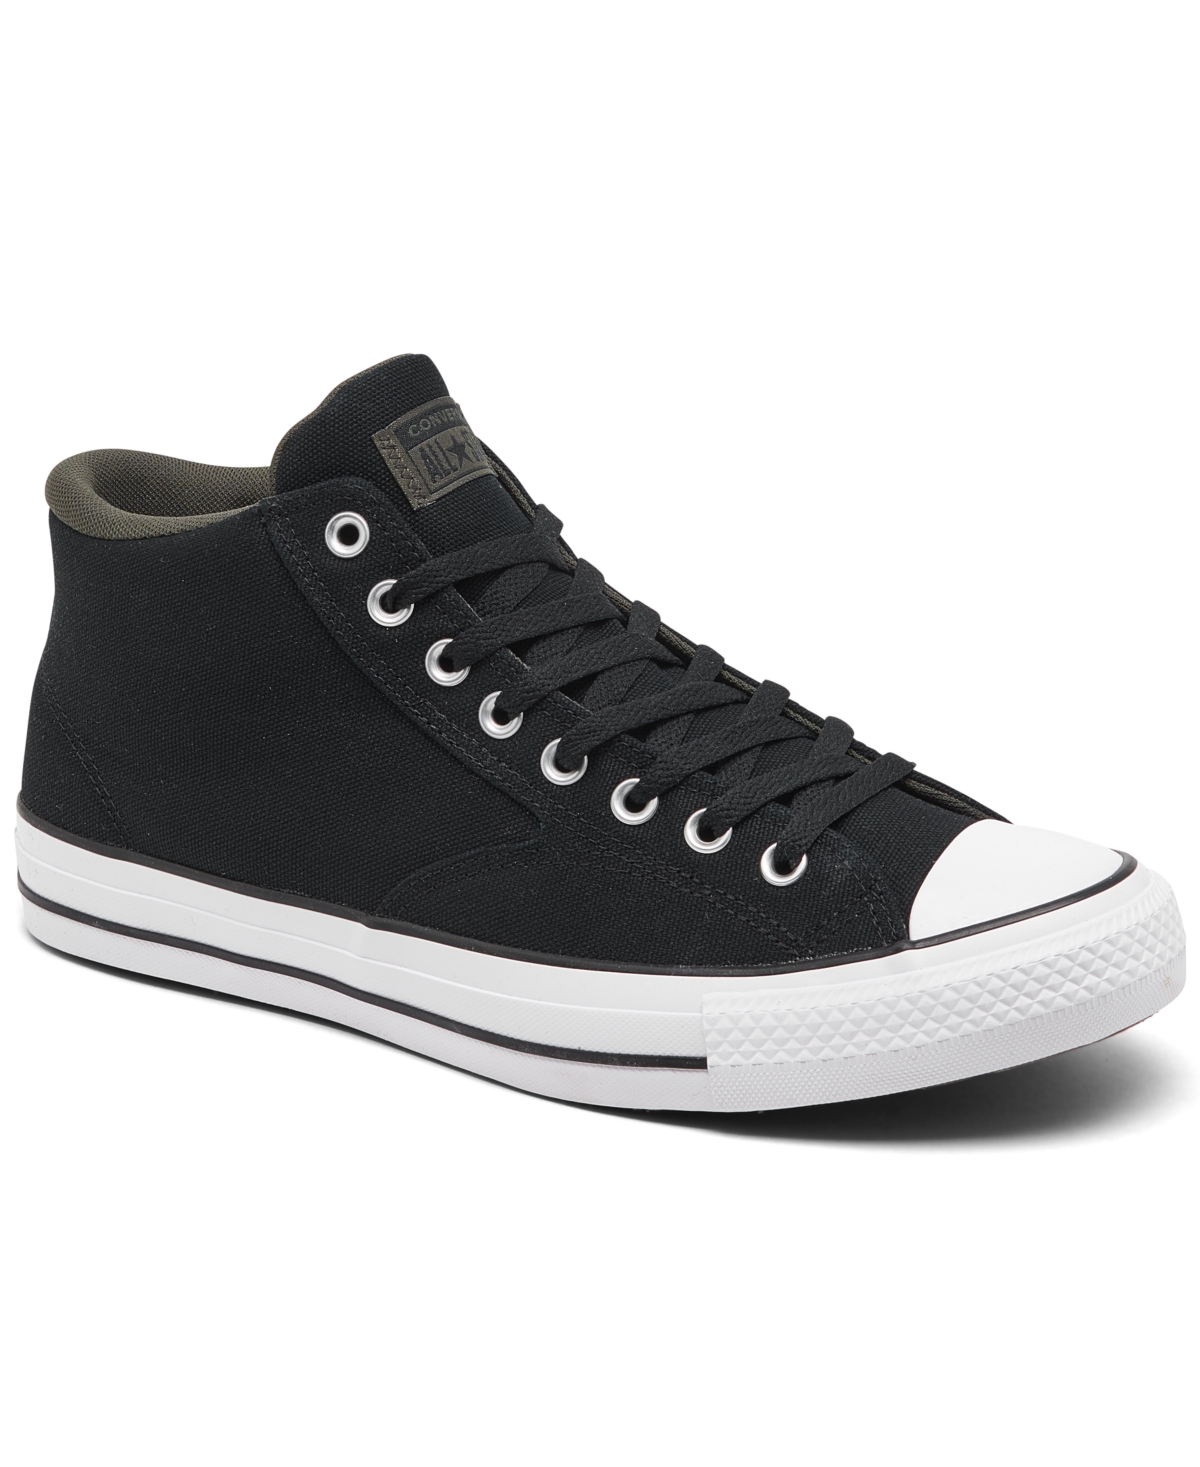 CONVERSE MEN'S CHUCK TAYLOR ALL STAR MALDEN STREET CASUAL SNEAKERS FROM FINISH LINE